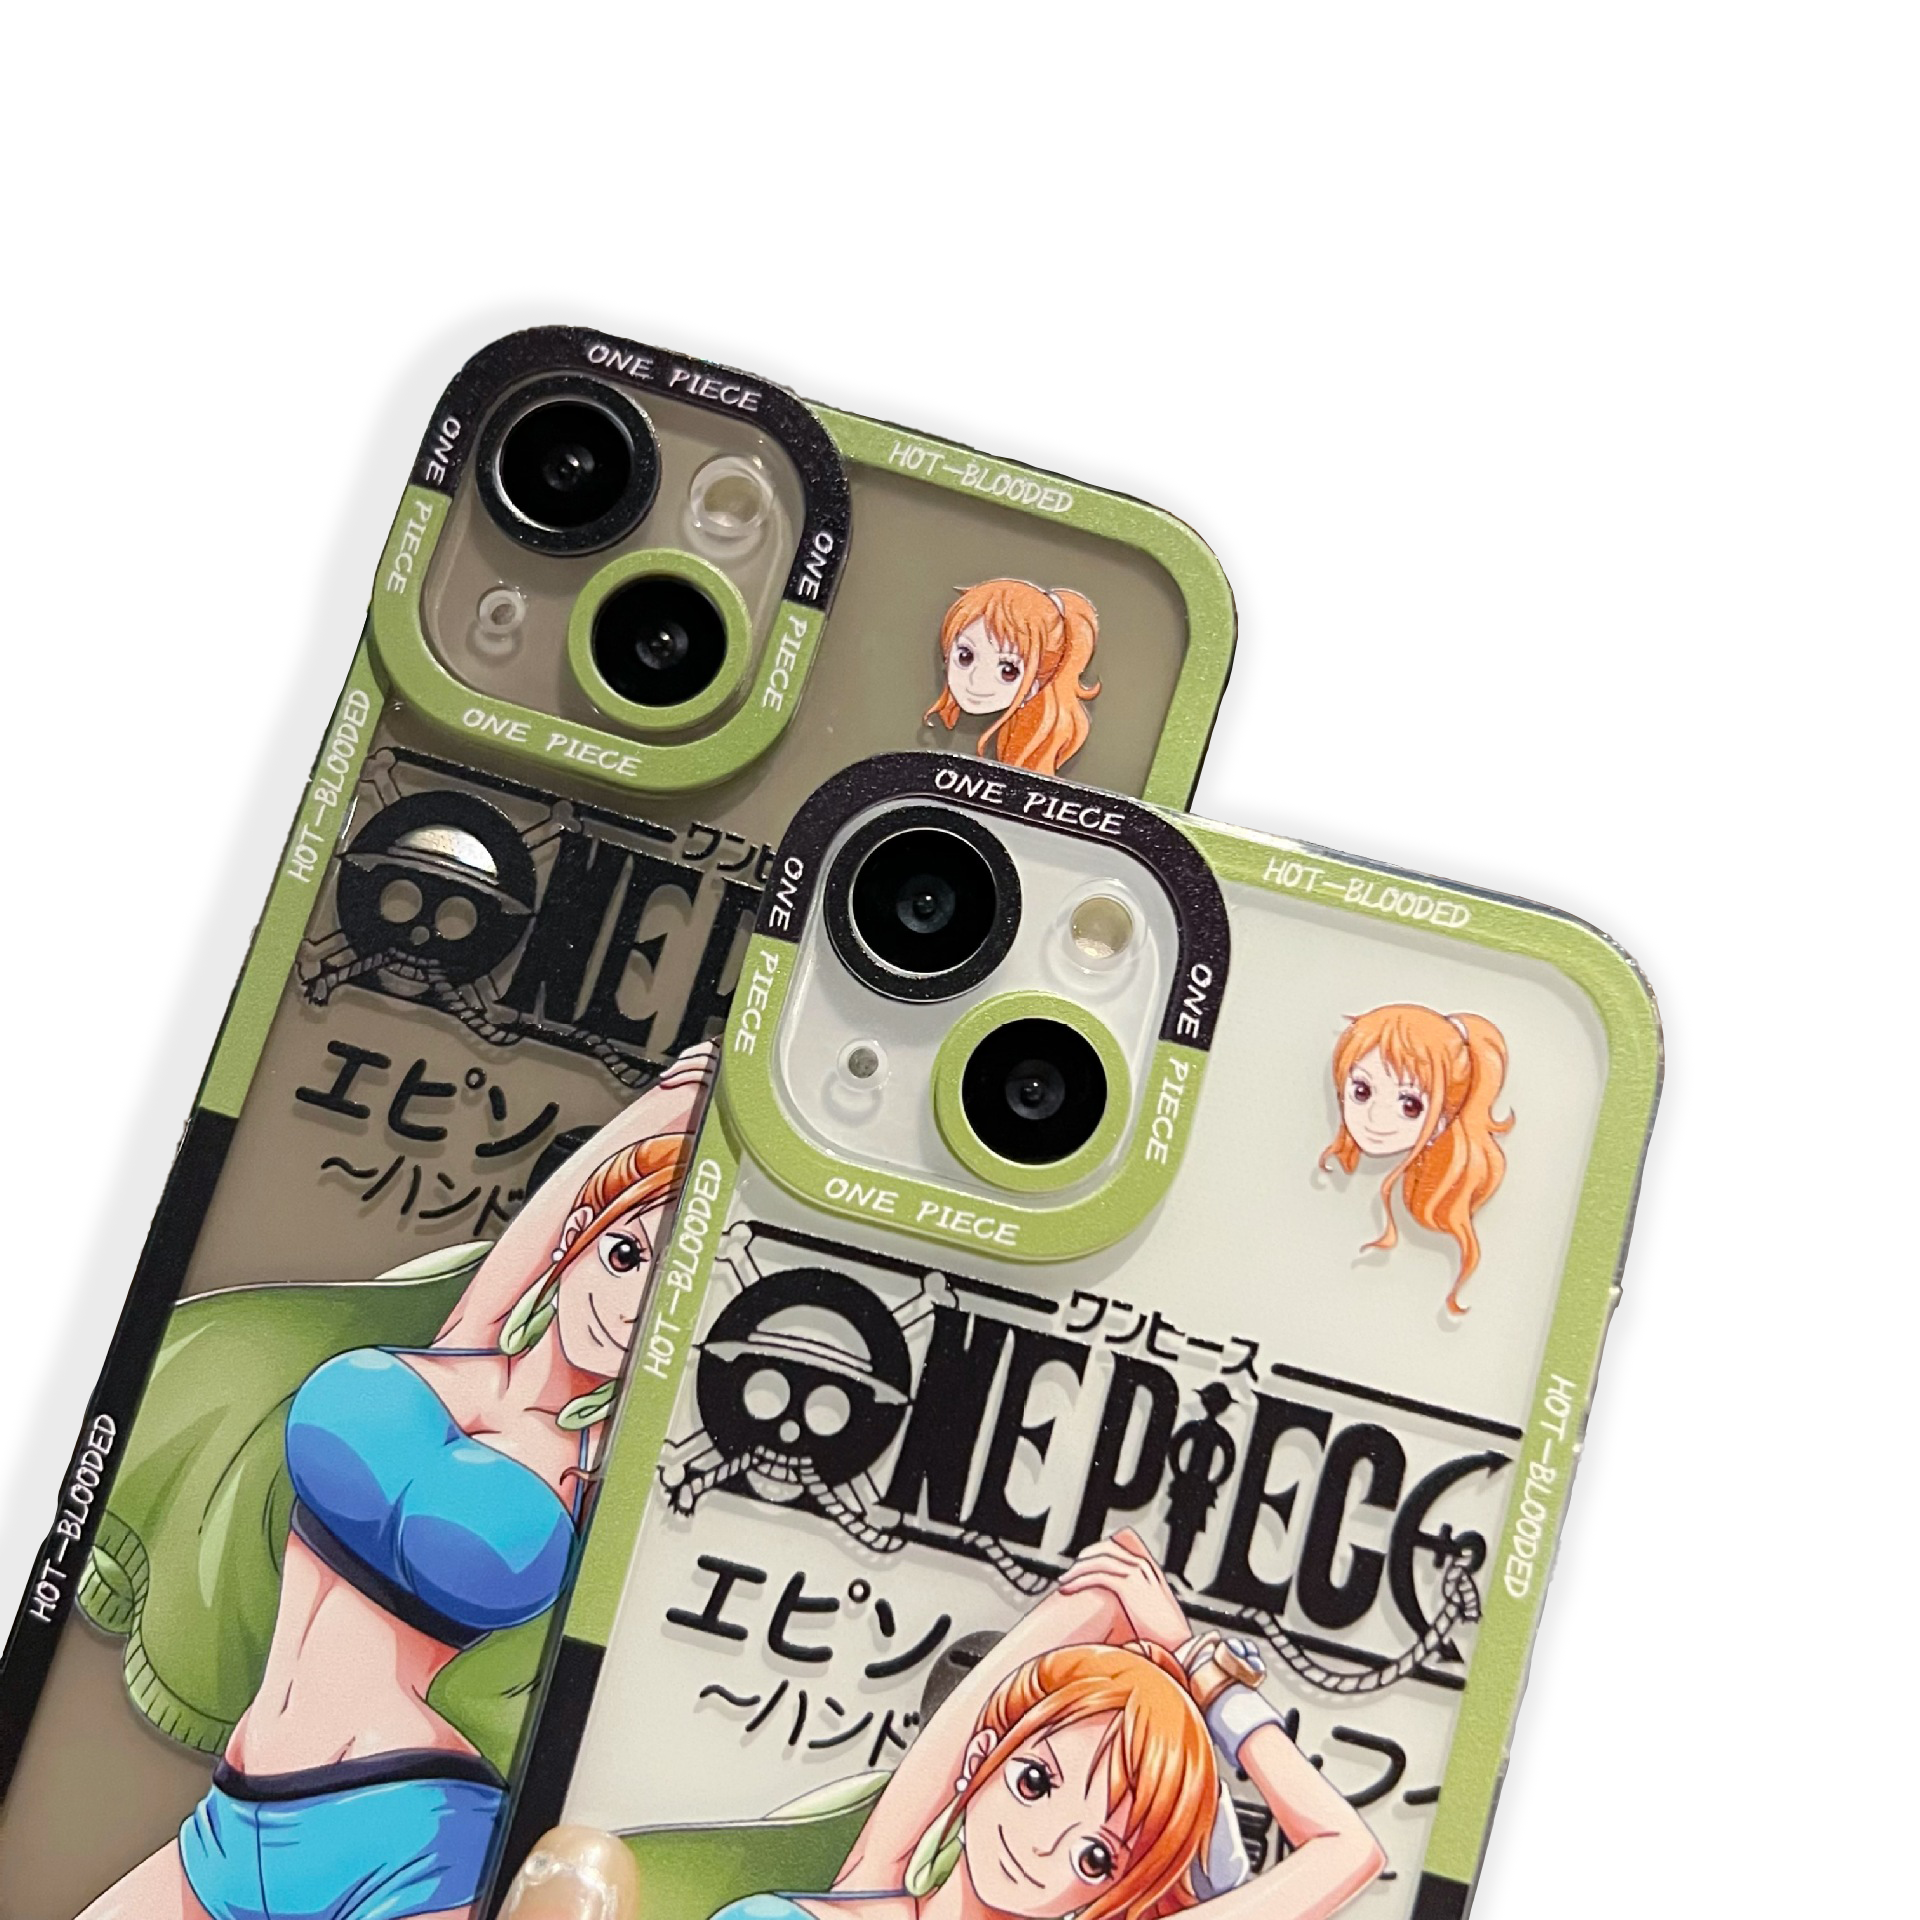 ONE PIECE ANIME STRAW HAT iPhone 13 Case Cover